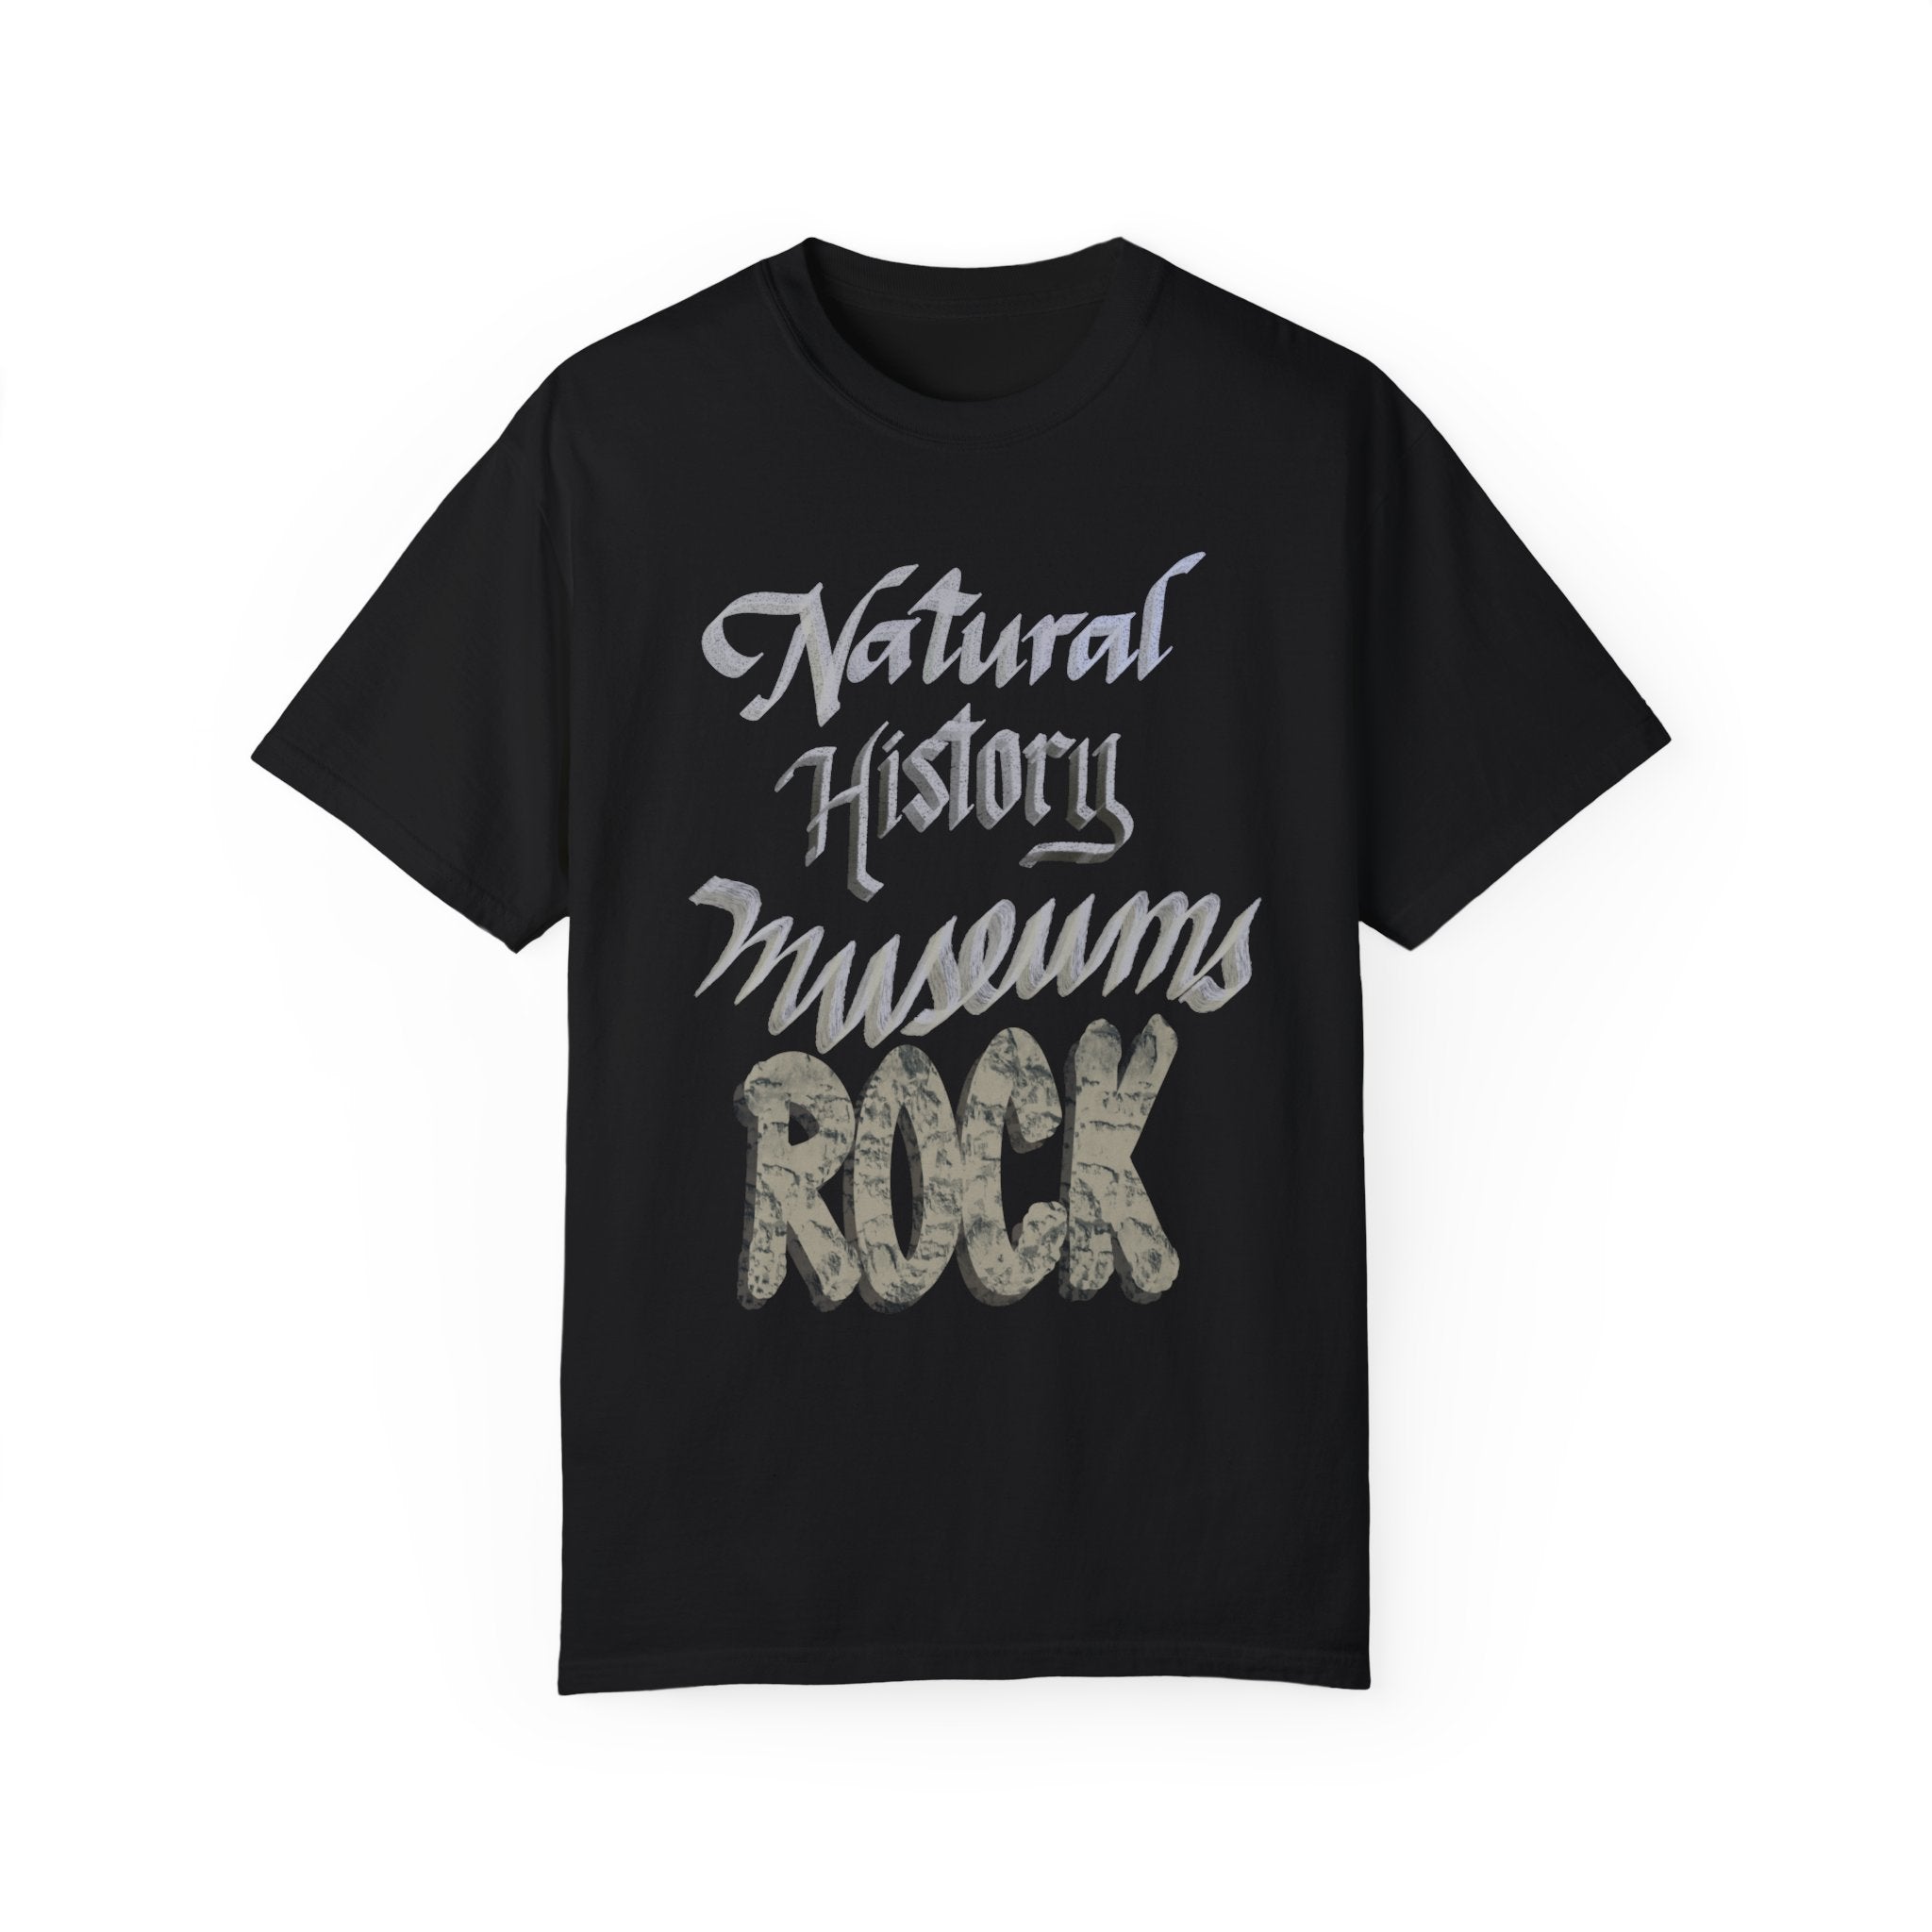 NATURAL HISTORY MUSEUMS ROCK Unisex Garment-Dyed T-shirt